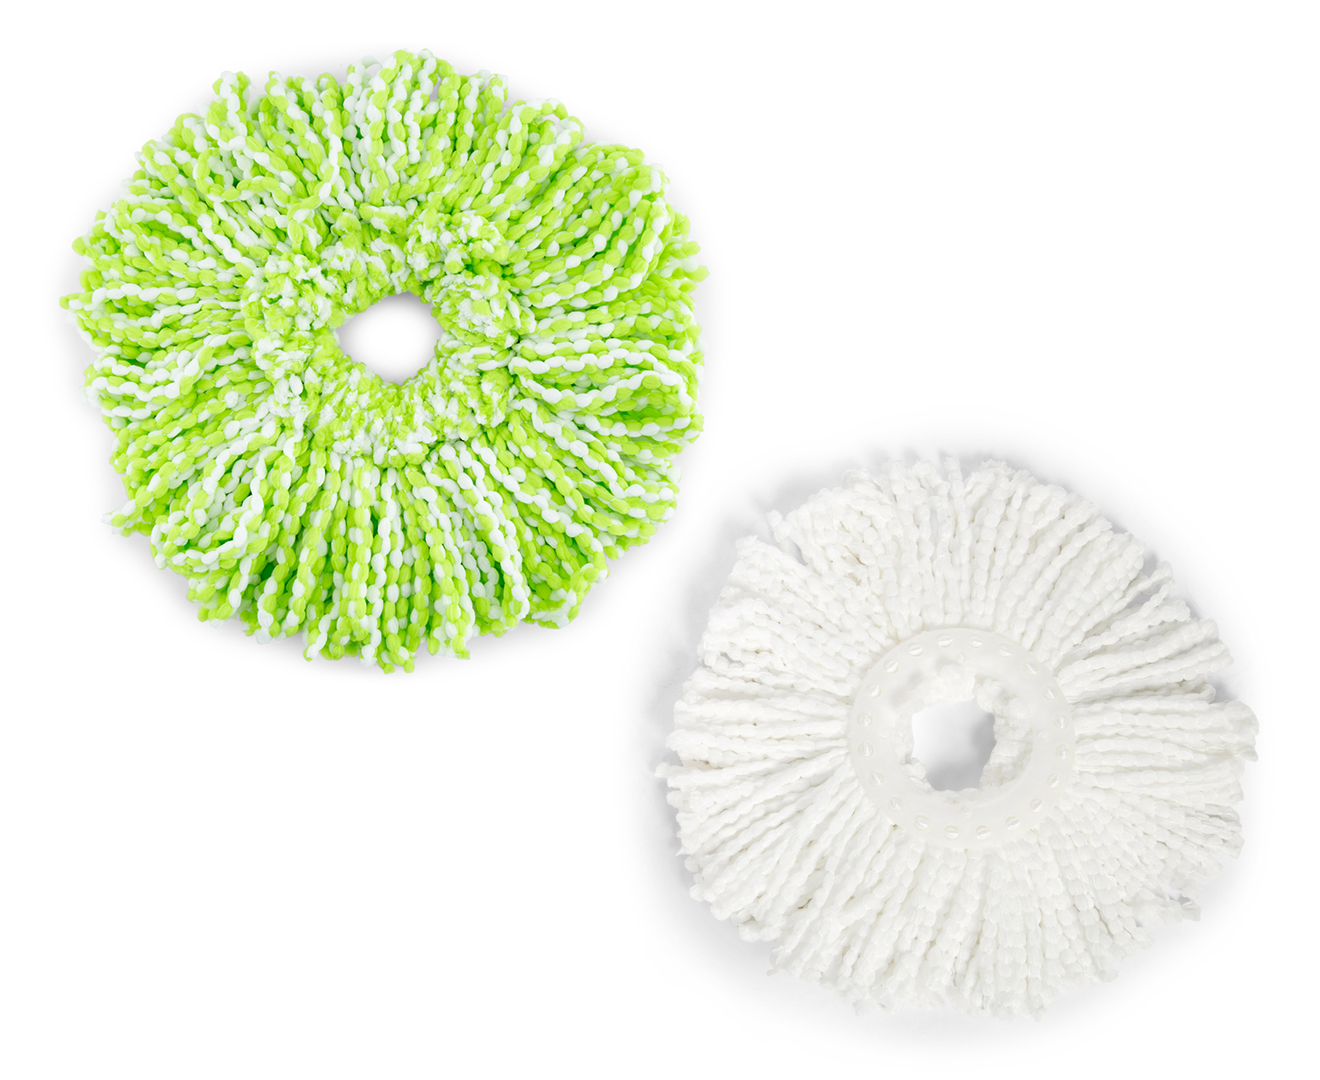 Replacement Mop Heads 2pk - White/Green